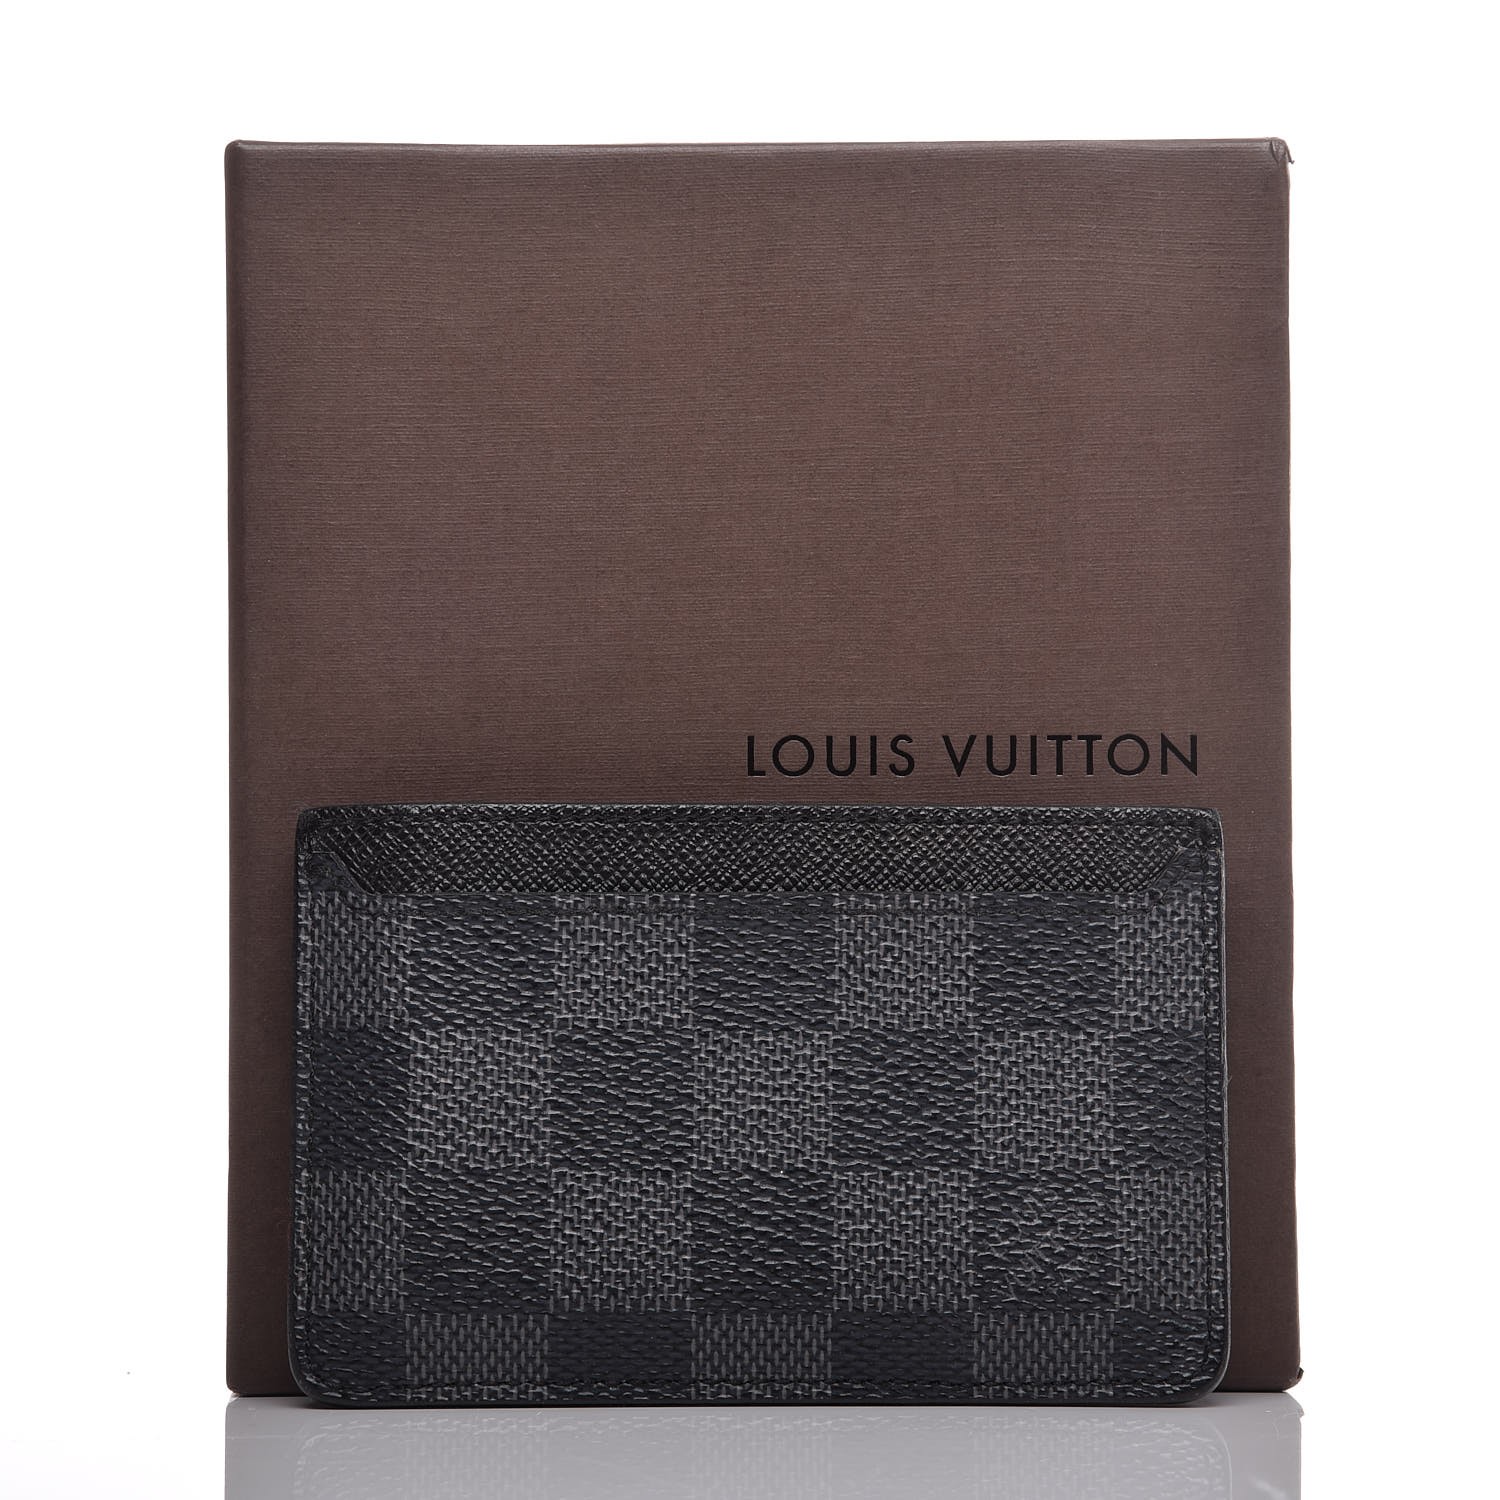 Neo Porte Cartes Damier Graphite Canvas - Wallets and Small